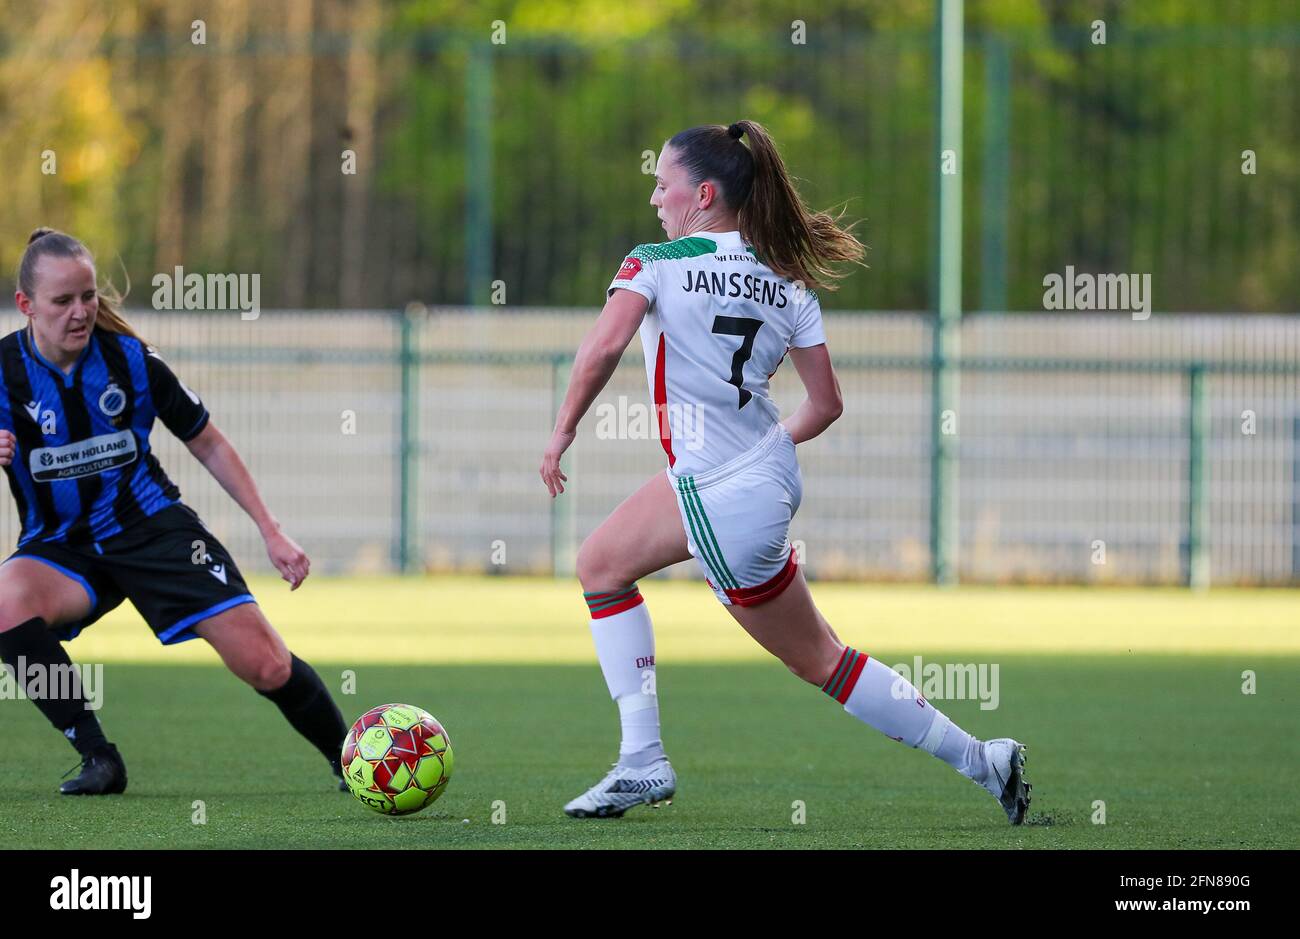 Heverlee, Belgium. 11th May, 2021. Jill Janssens (7) of OHL pictured in  action during a female soccer game between Oud Heverlee Leuven and Club  Brugge YLA on the 6 th matchday of